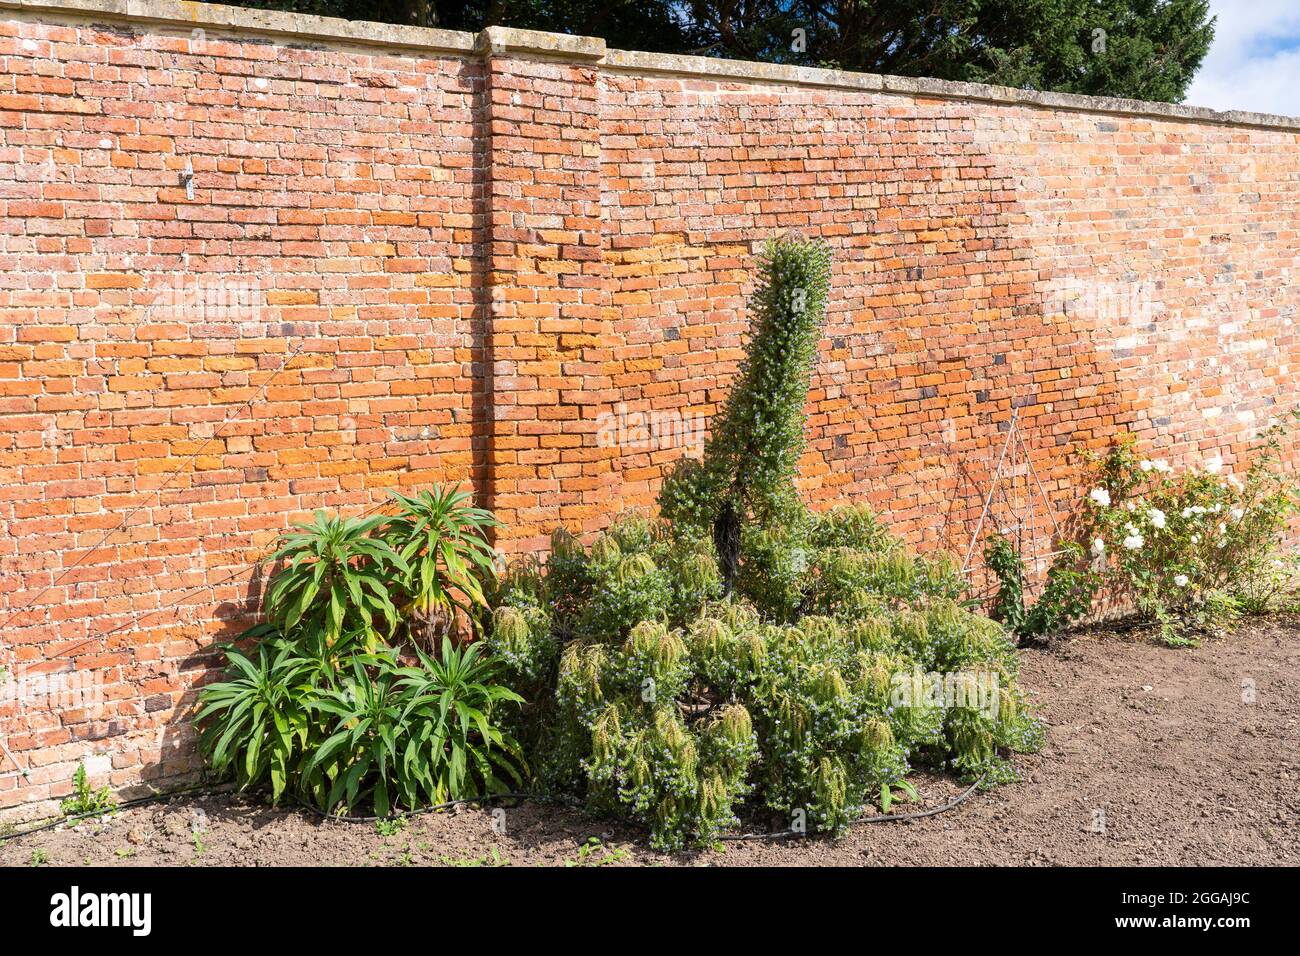 Echium candicans (pride of madeira) growing in the renovated Georgian Walled Gardens, originally designed by 'Capability' Brown at Croome Park, UK Stock Photo